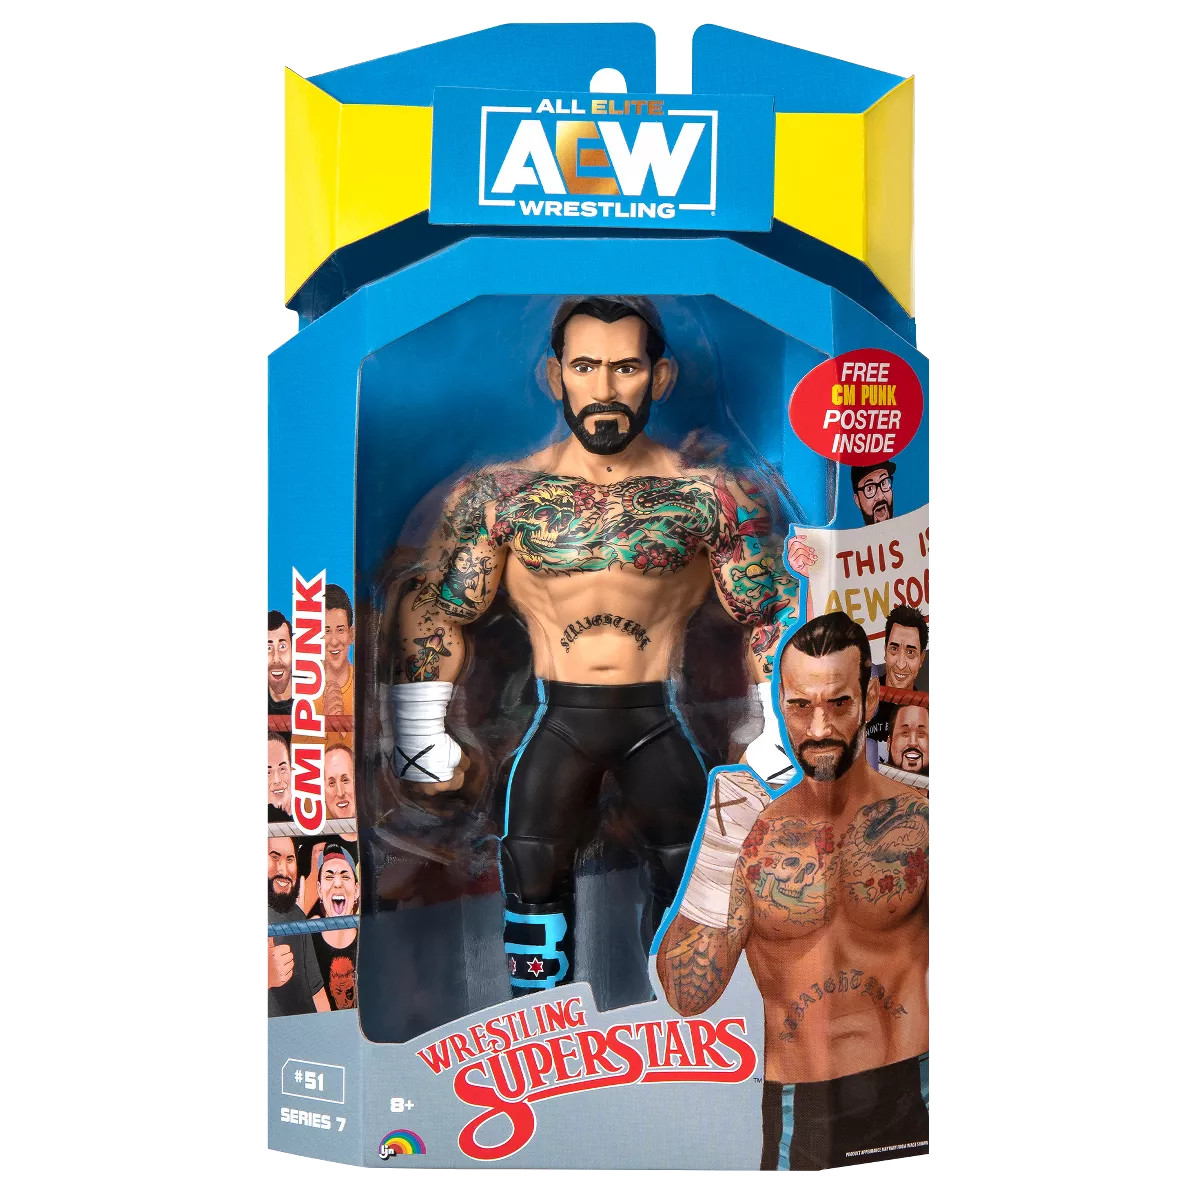 CM PUNK (CHICAGO EDITION) NEW In Package Micro Brawler – St